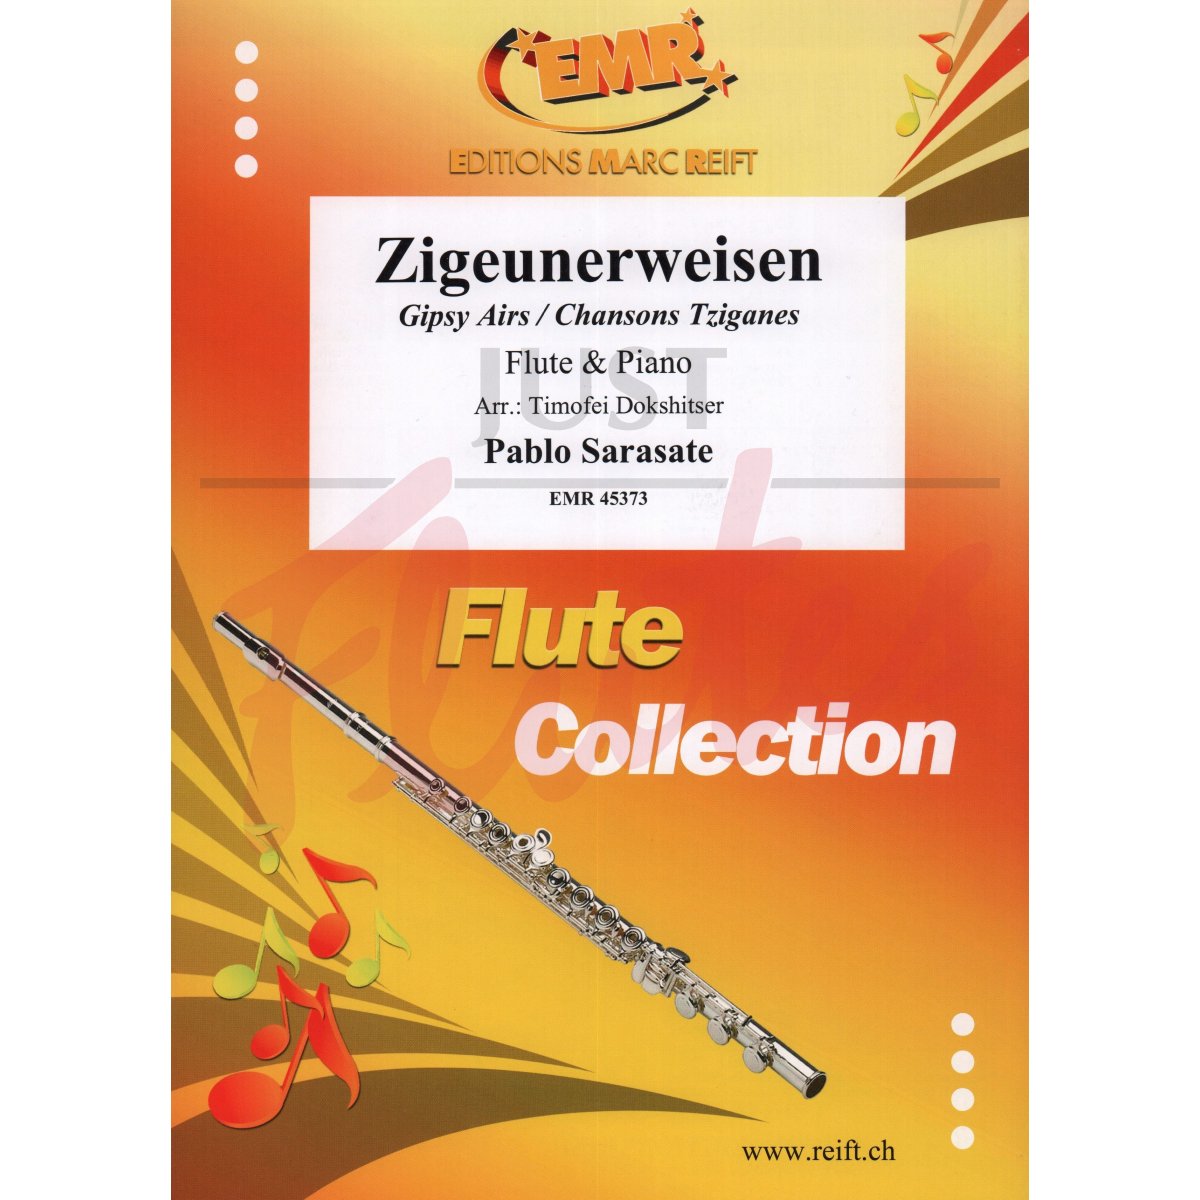 Zigeunerweisen (Gypsy Airs/Chansons Tziganes) for Flute and Piano